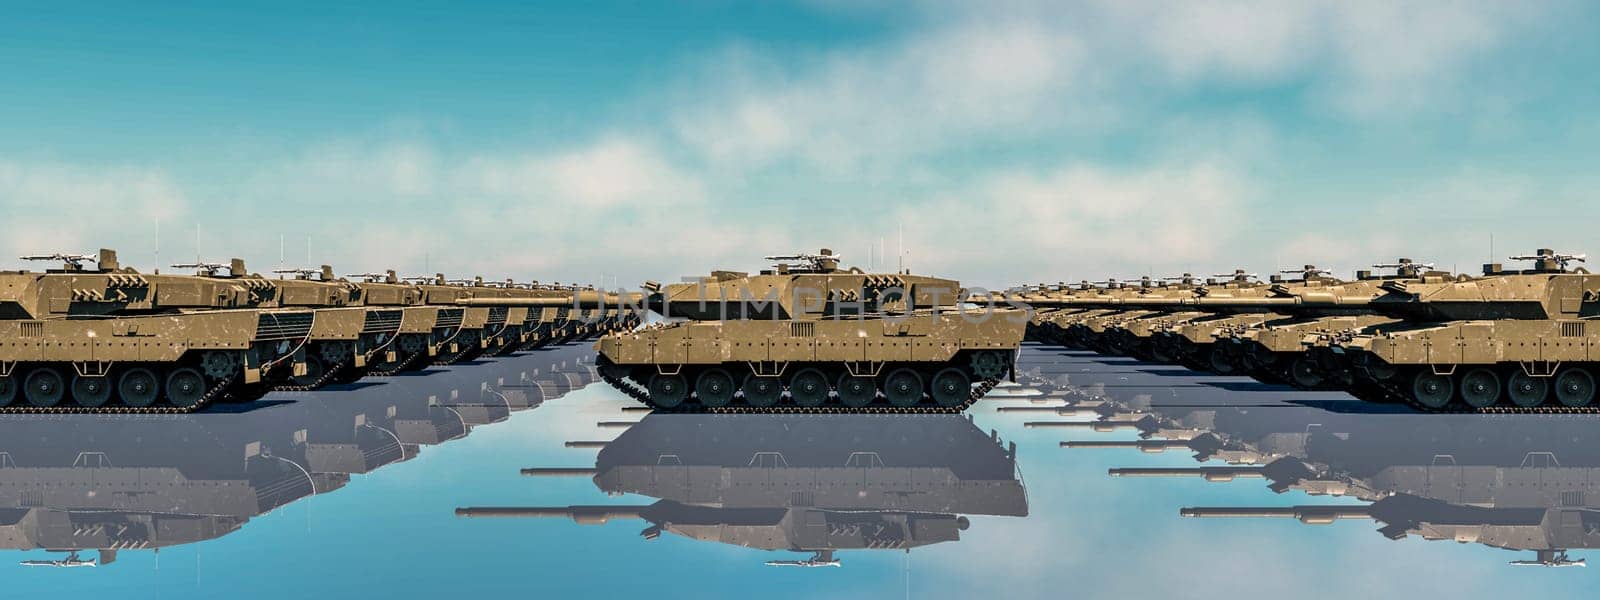 A powerful display of military tanks, their reflections creating a symmetrical vision of strength on water